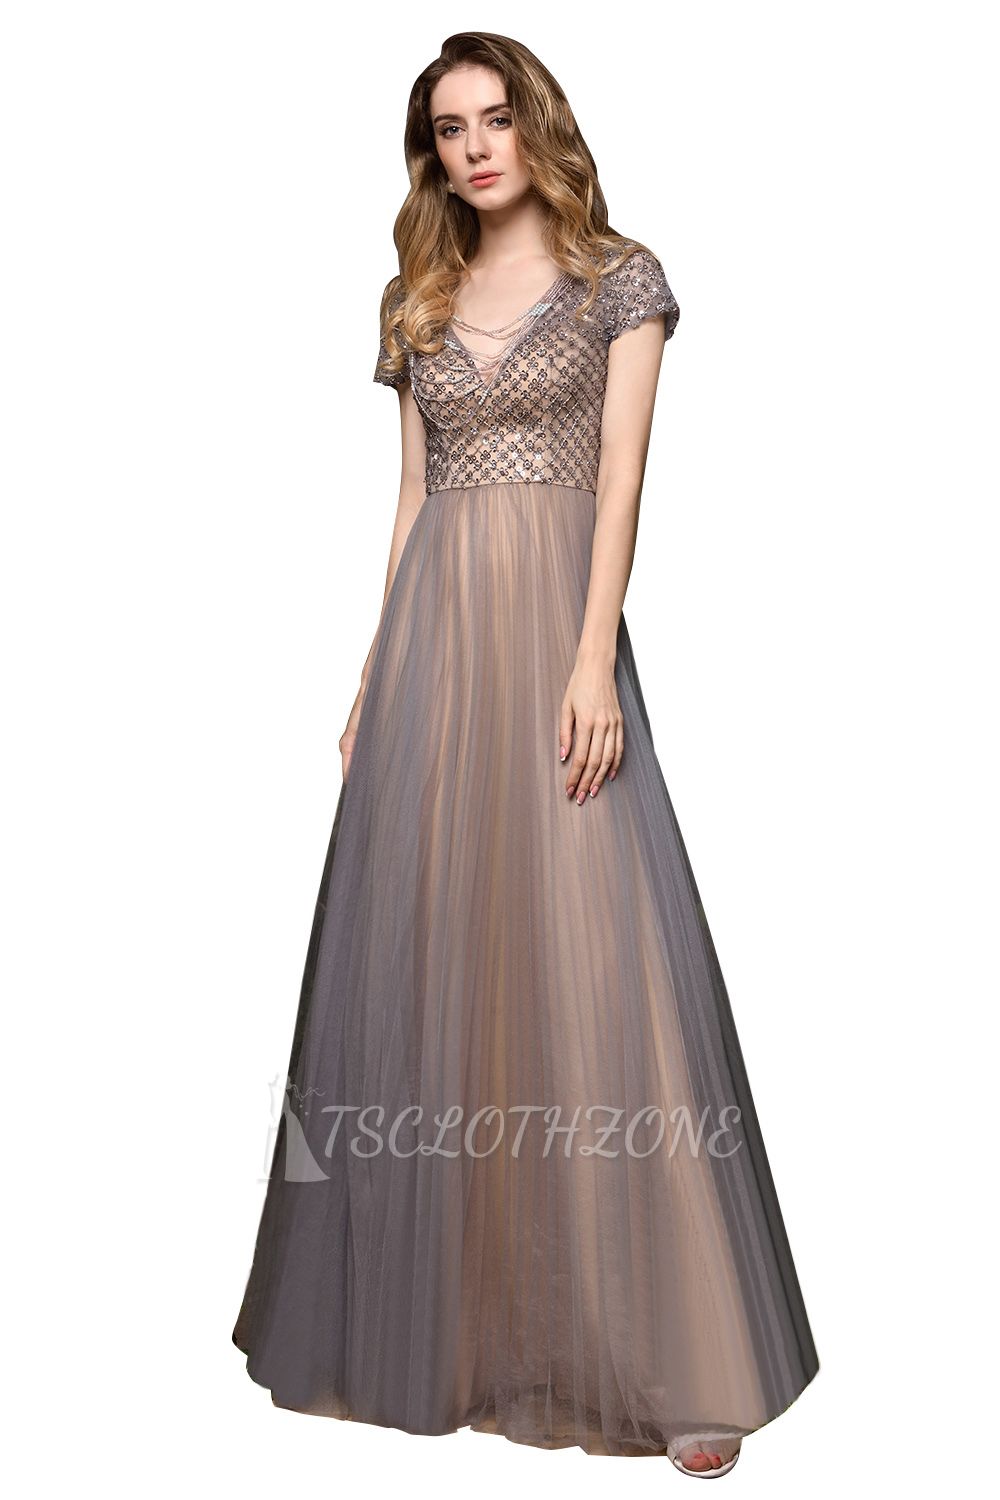 Aria | Stunning Short Sleeves Squared Sequined Tulle Luxury Prom Dress